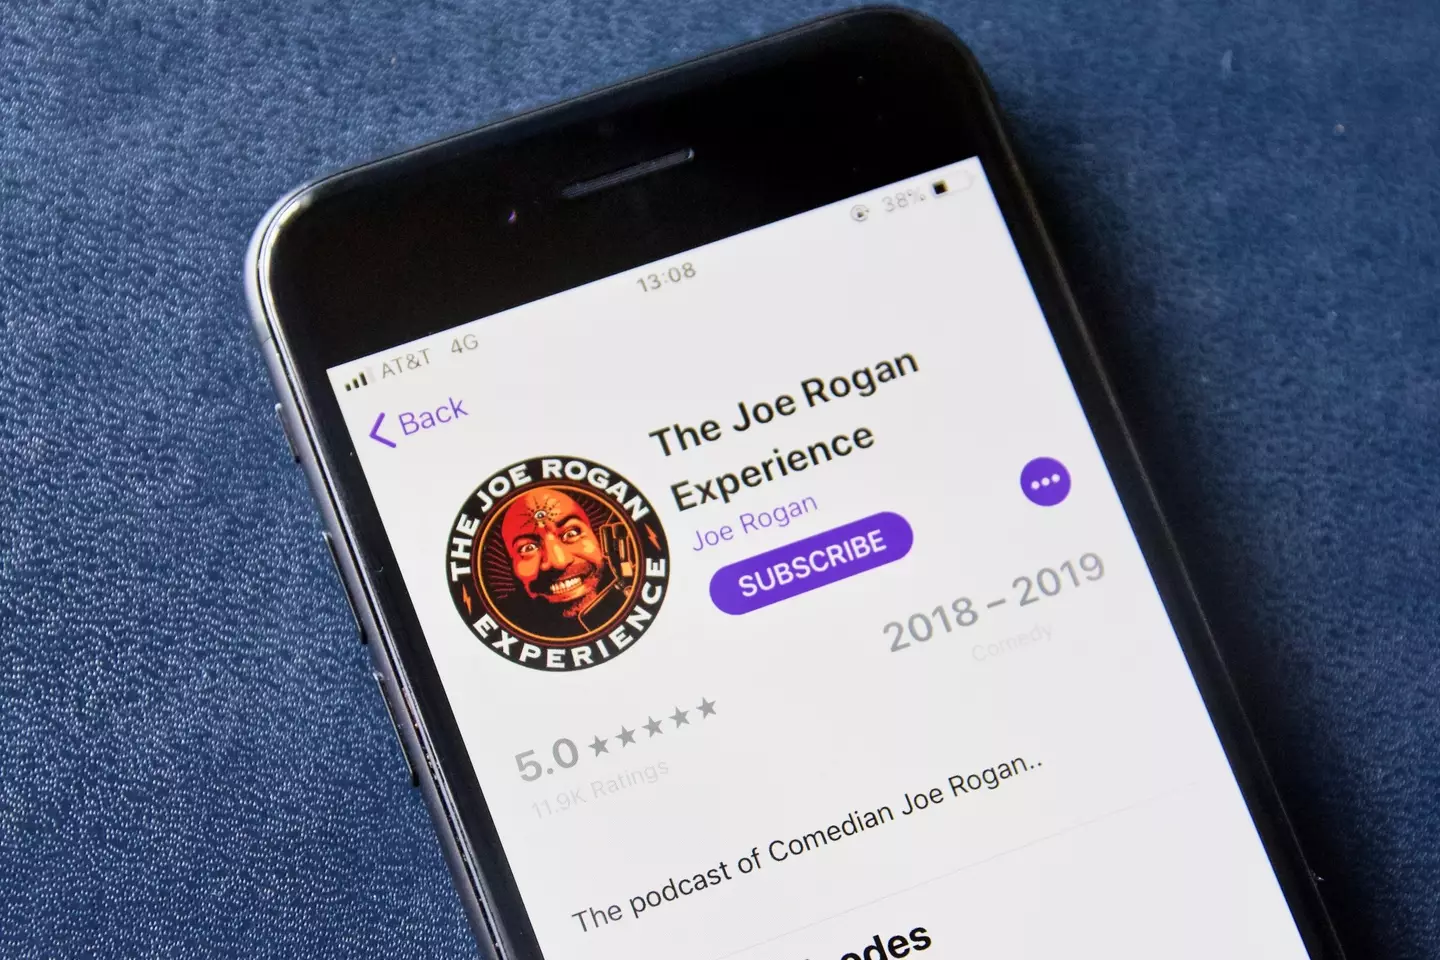 The Joe Rogan Experience is the world's most popular podcast.